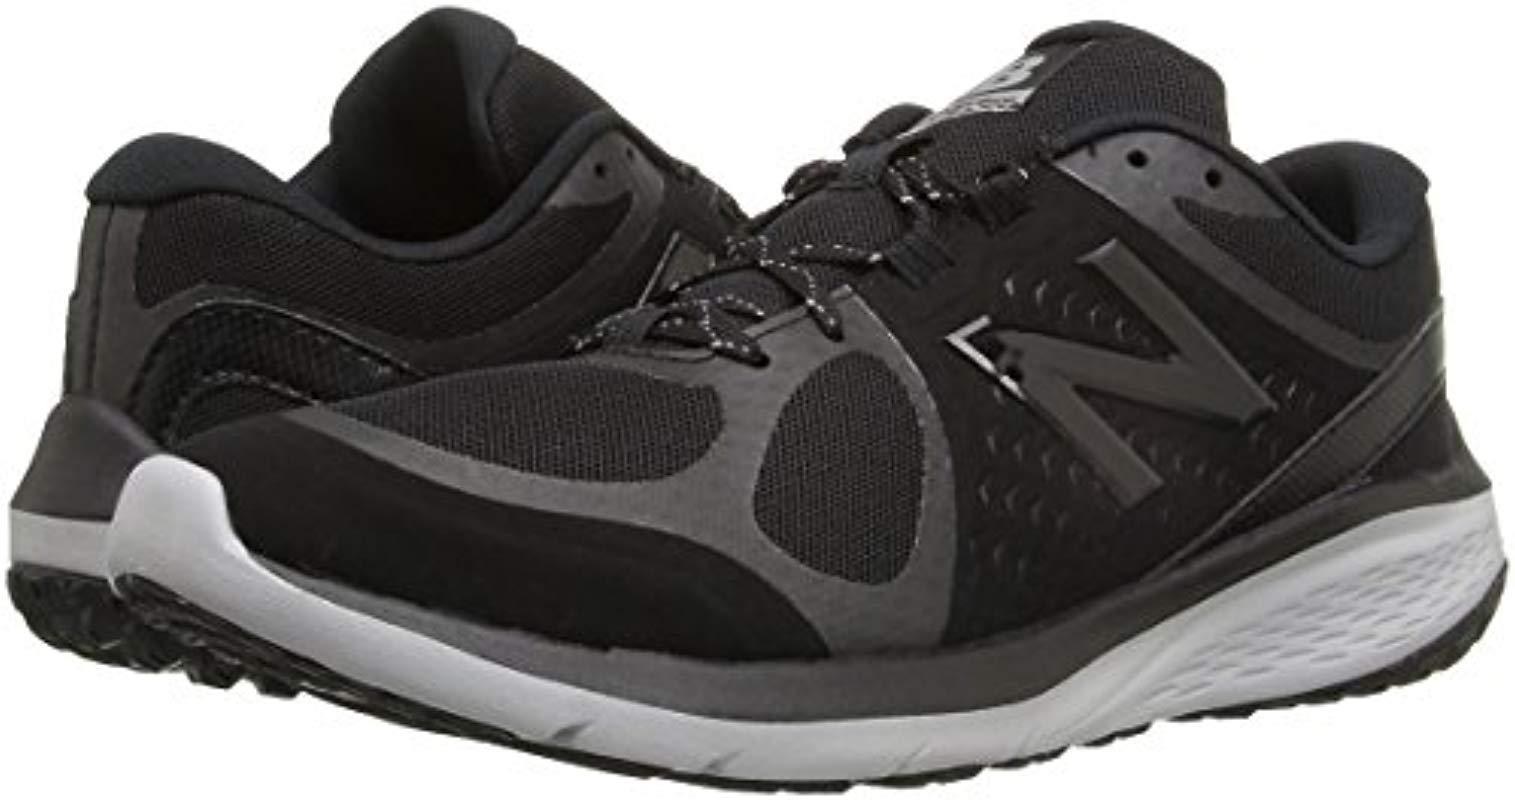 New Balance Lace 85v1 Walking Shoe in 